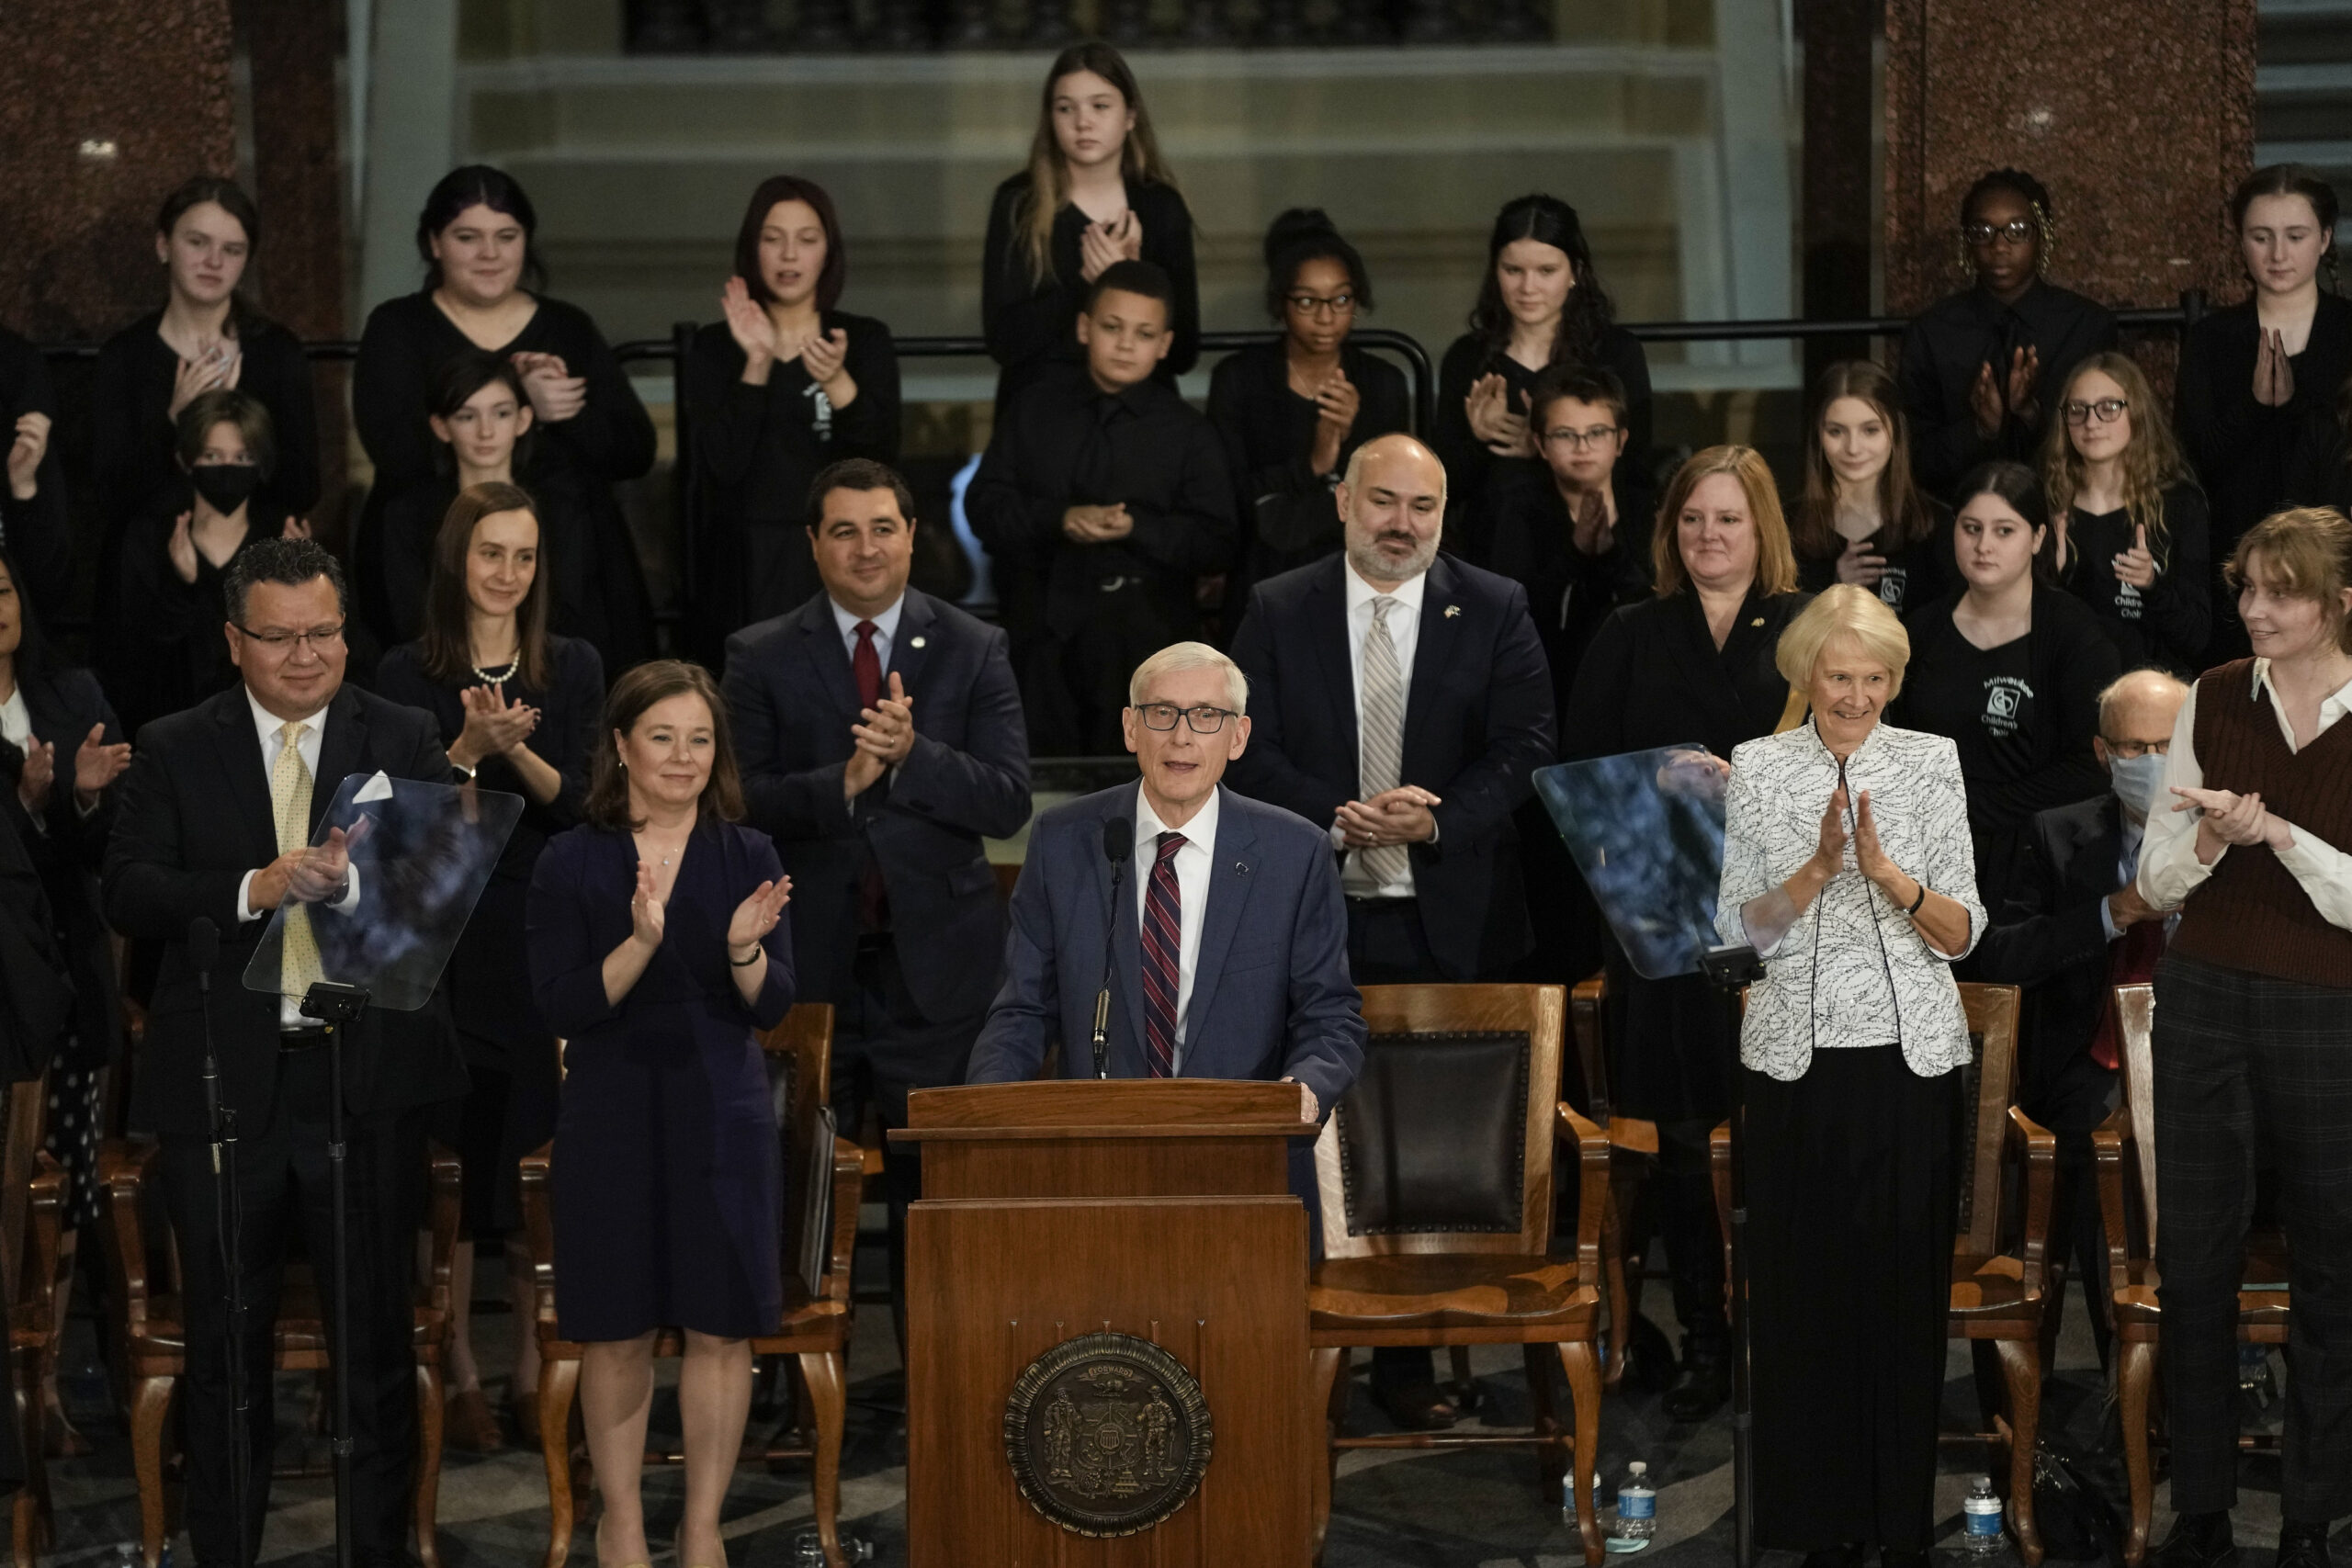 Gov. Tony Evers calls for protecting abortion rights, expanding Medicaid in second inaugural address